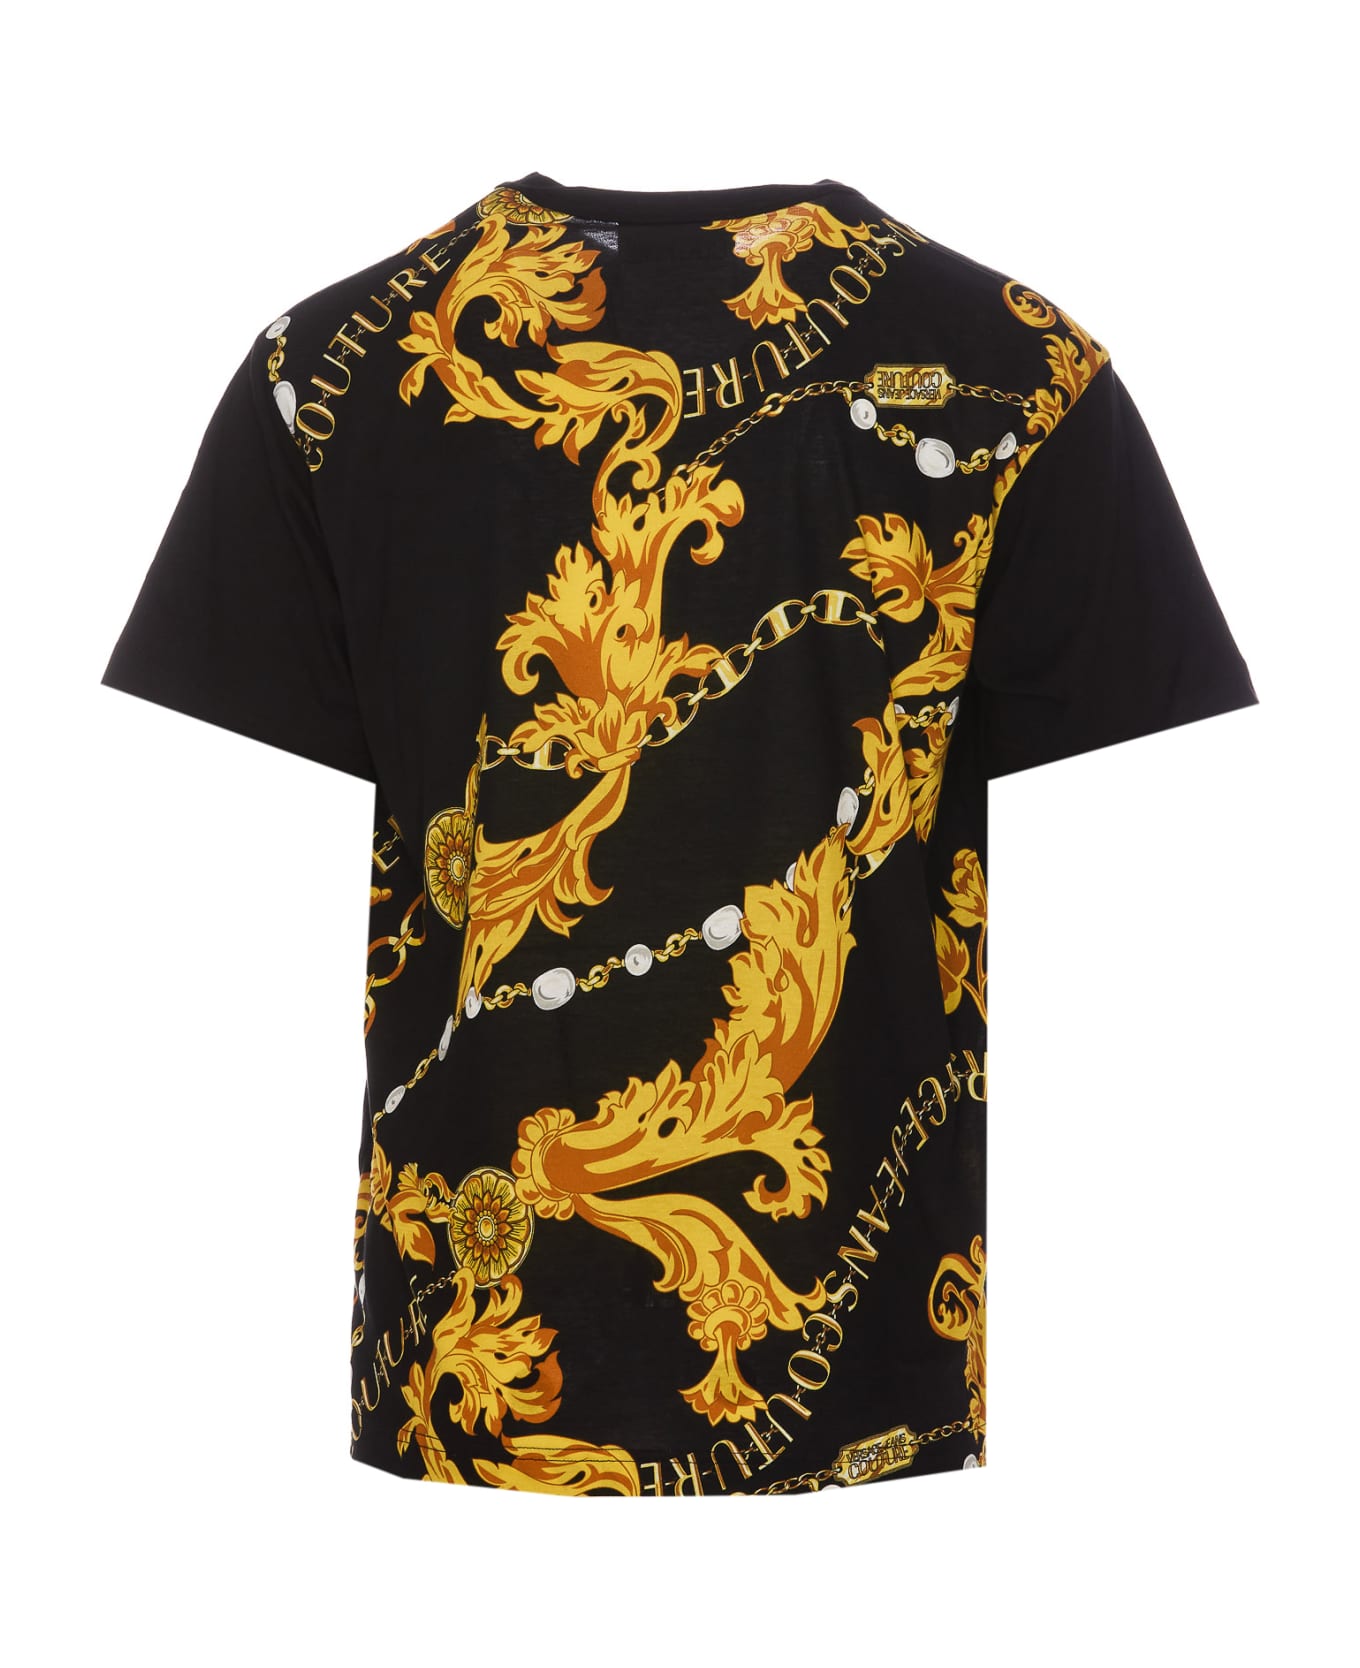 Versace Jeans Couture Chain Couture Print T-shirt - Black Gold